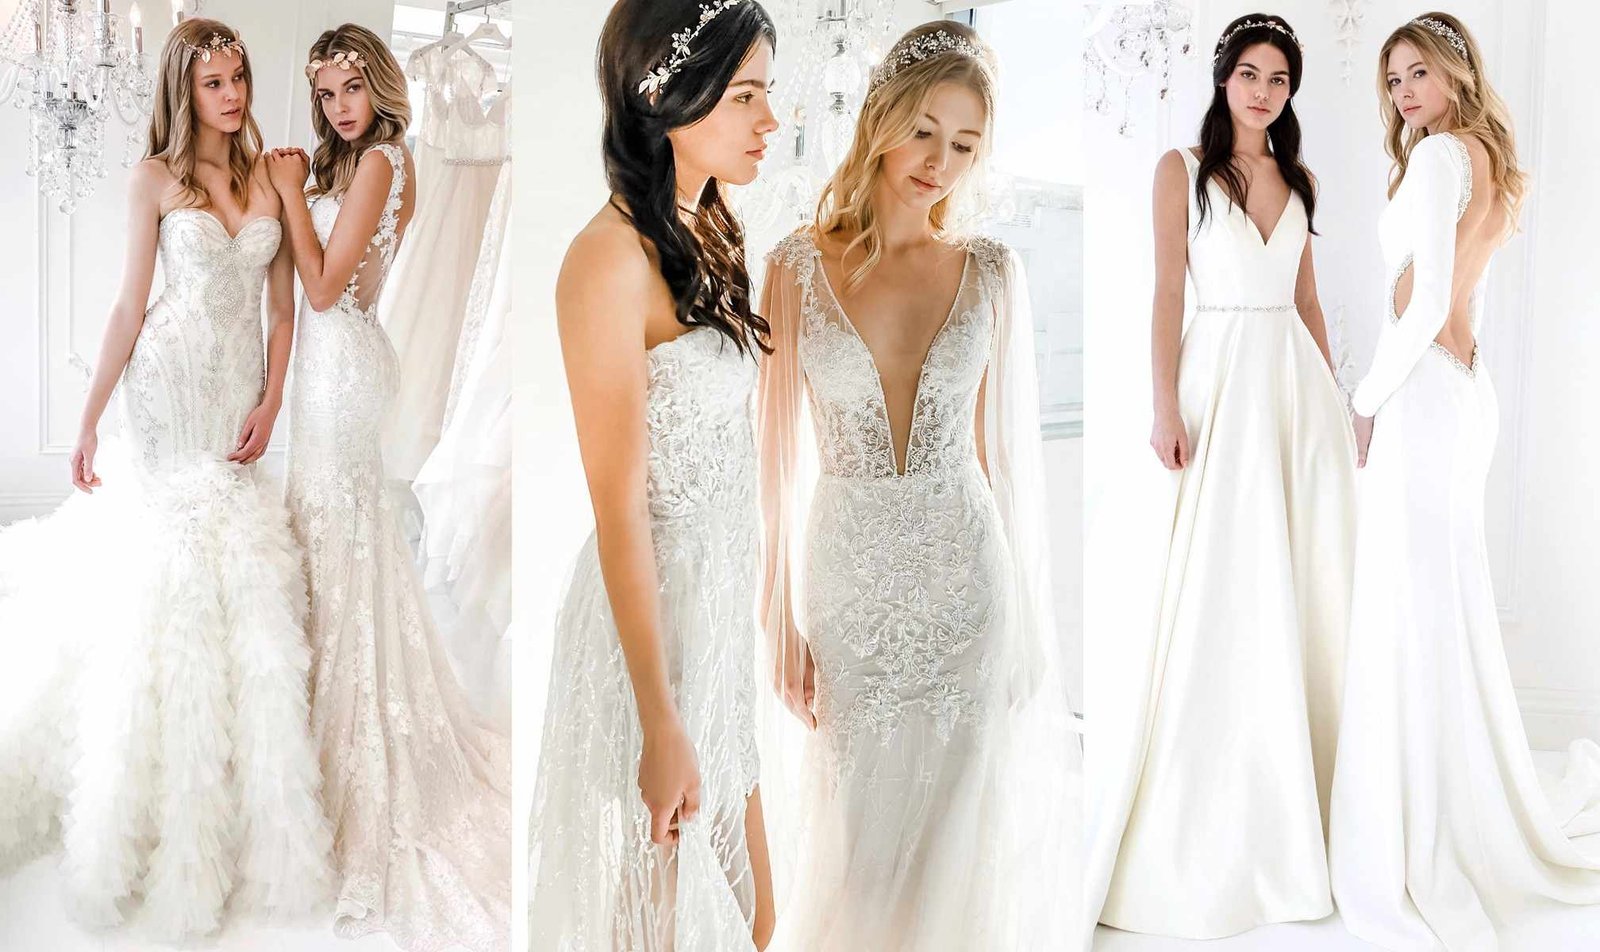 4 Gorgeous Wedding Dresses on Trend for Brides to Try in 2023